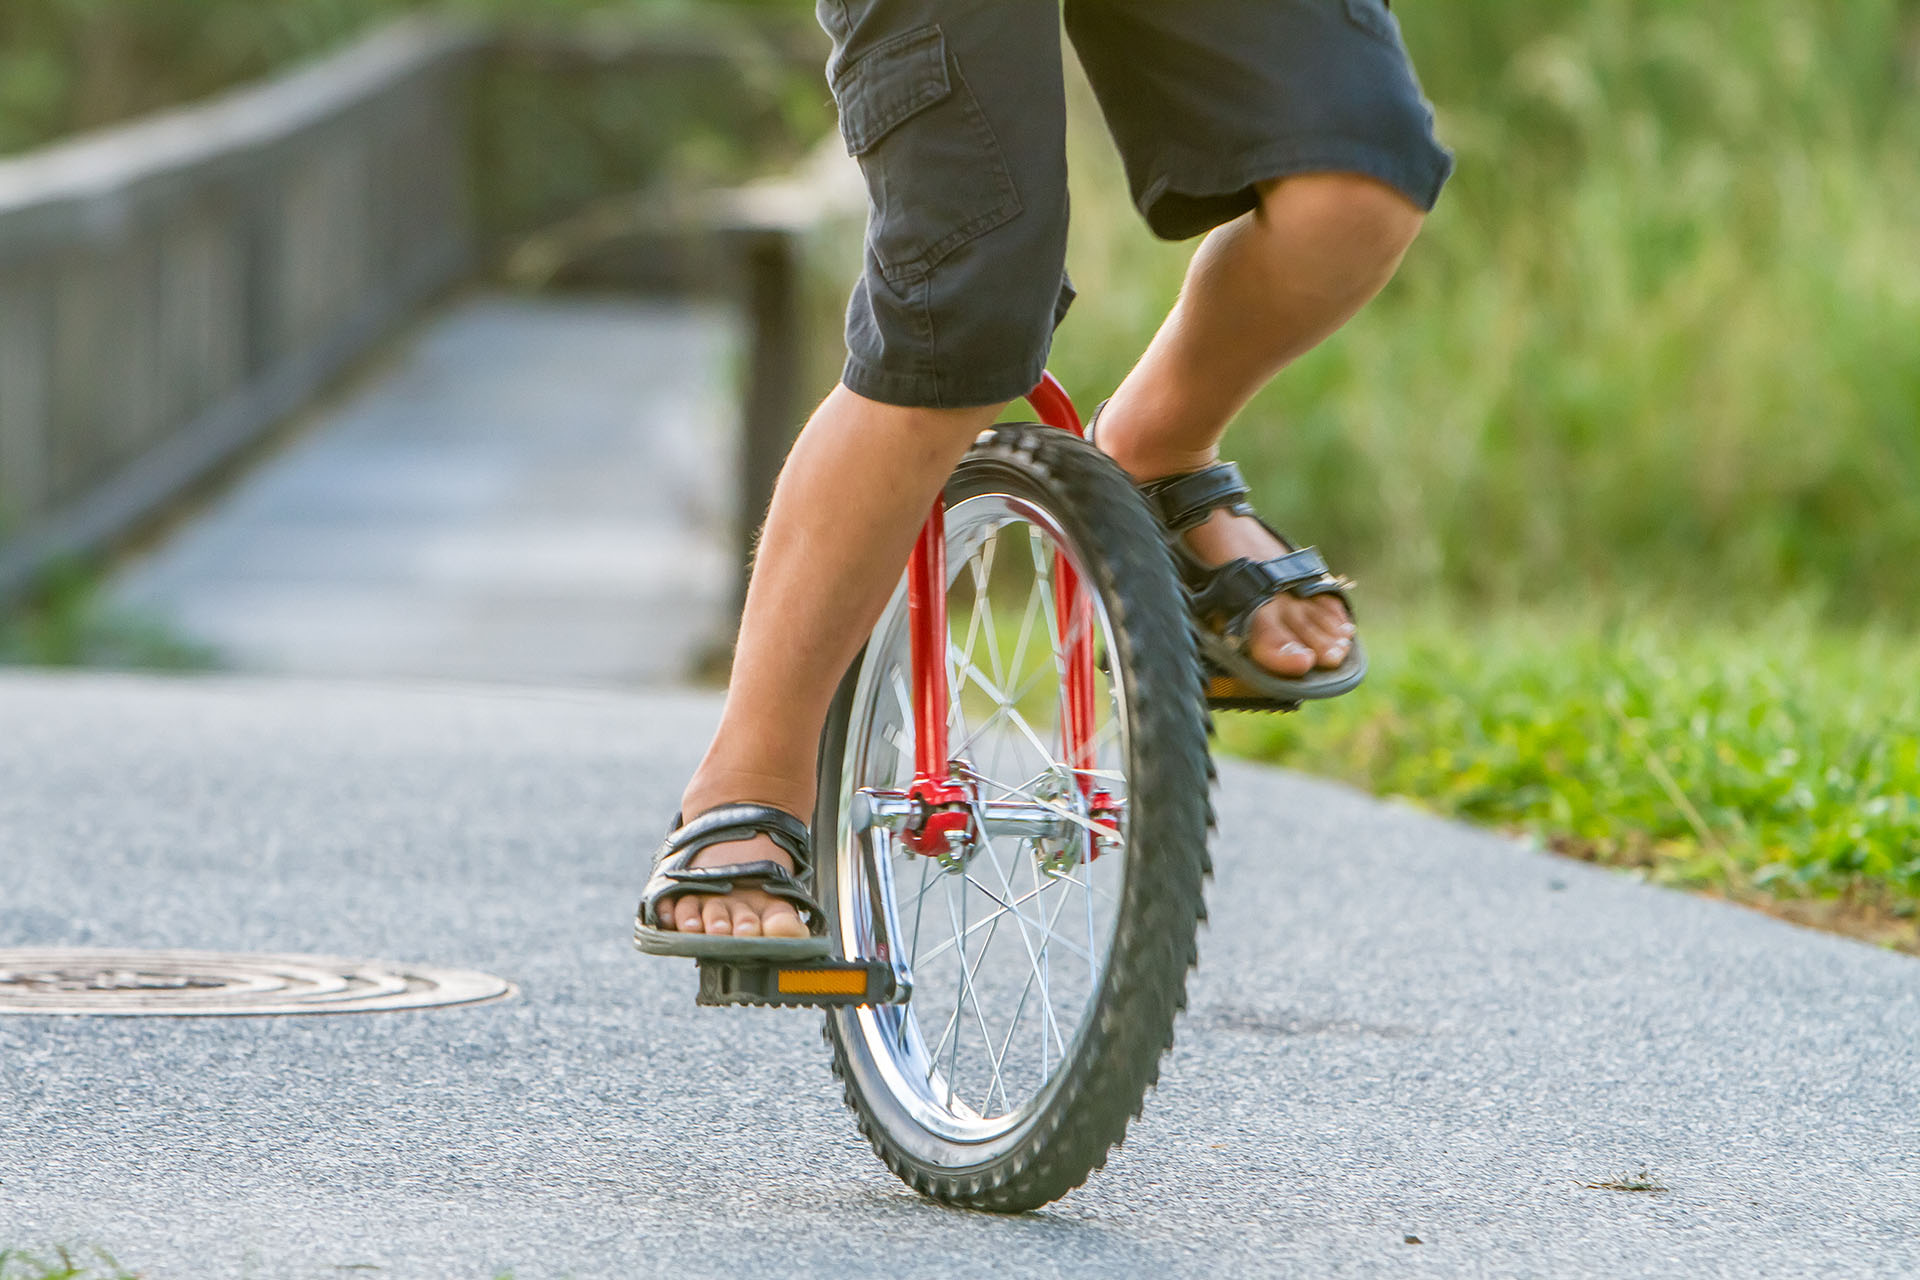 outdoor portrait of young boy riding a unicycle (one wheel bike) on natural background